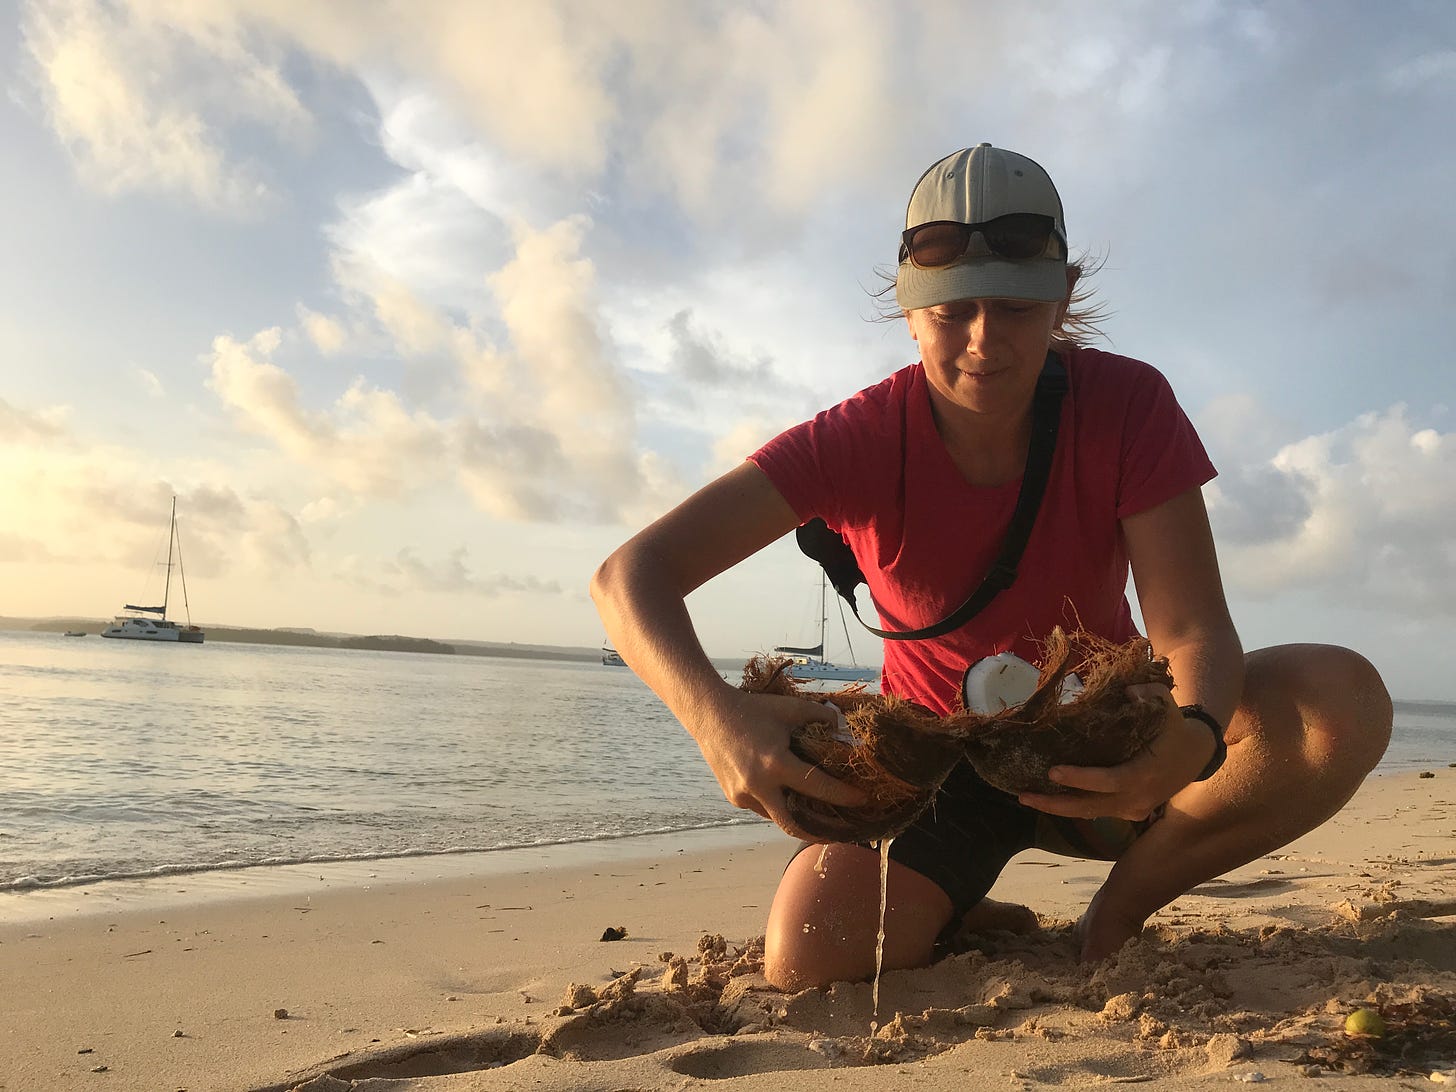 Trying to catch fresh coconut juice near Vava'u, Tonga.  Alt text: 30 year old woman on knees in shorts and t-shirt opens fresh coconut on sandy tropical beach with catamaran floating on sea in distance with puffy white clouds in blue sky above